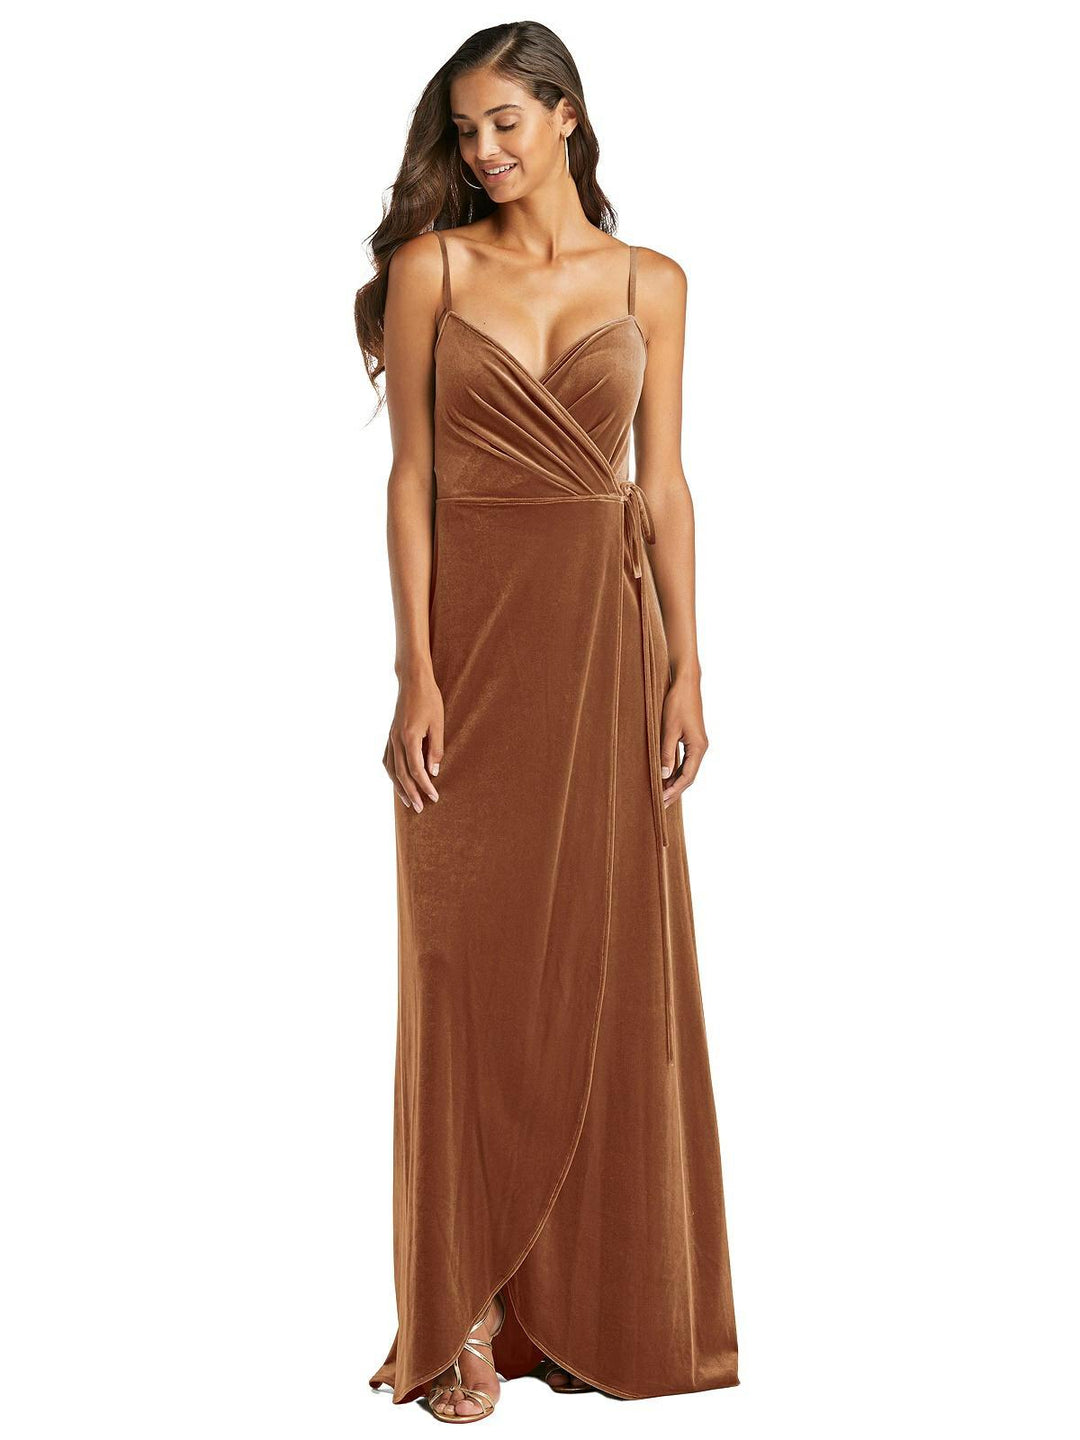 Velvet Wrap Maxi Dress by Dessy Style 1536 Size Small